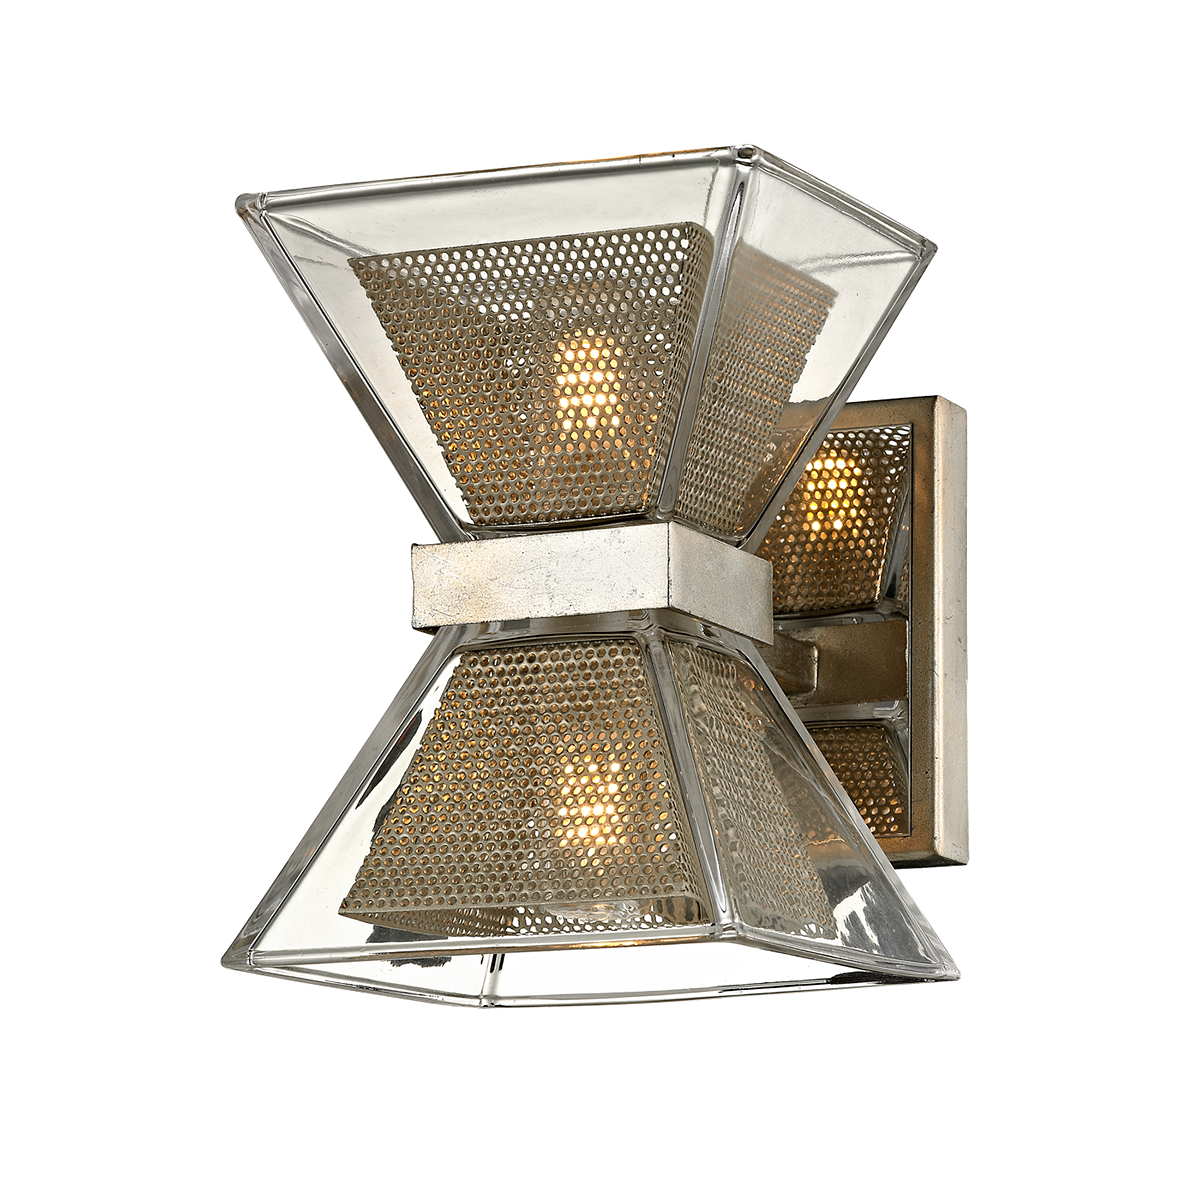 Troy Lighting Expression Sconce Bath and Vanity Troy Lighting SILVER LEAF 5.25x5.25x7 